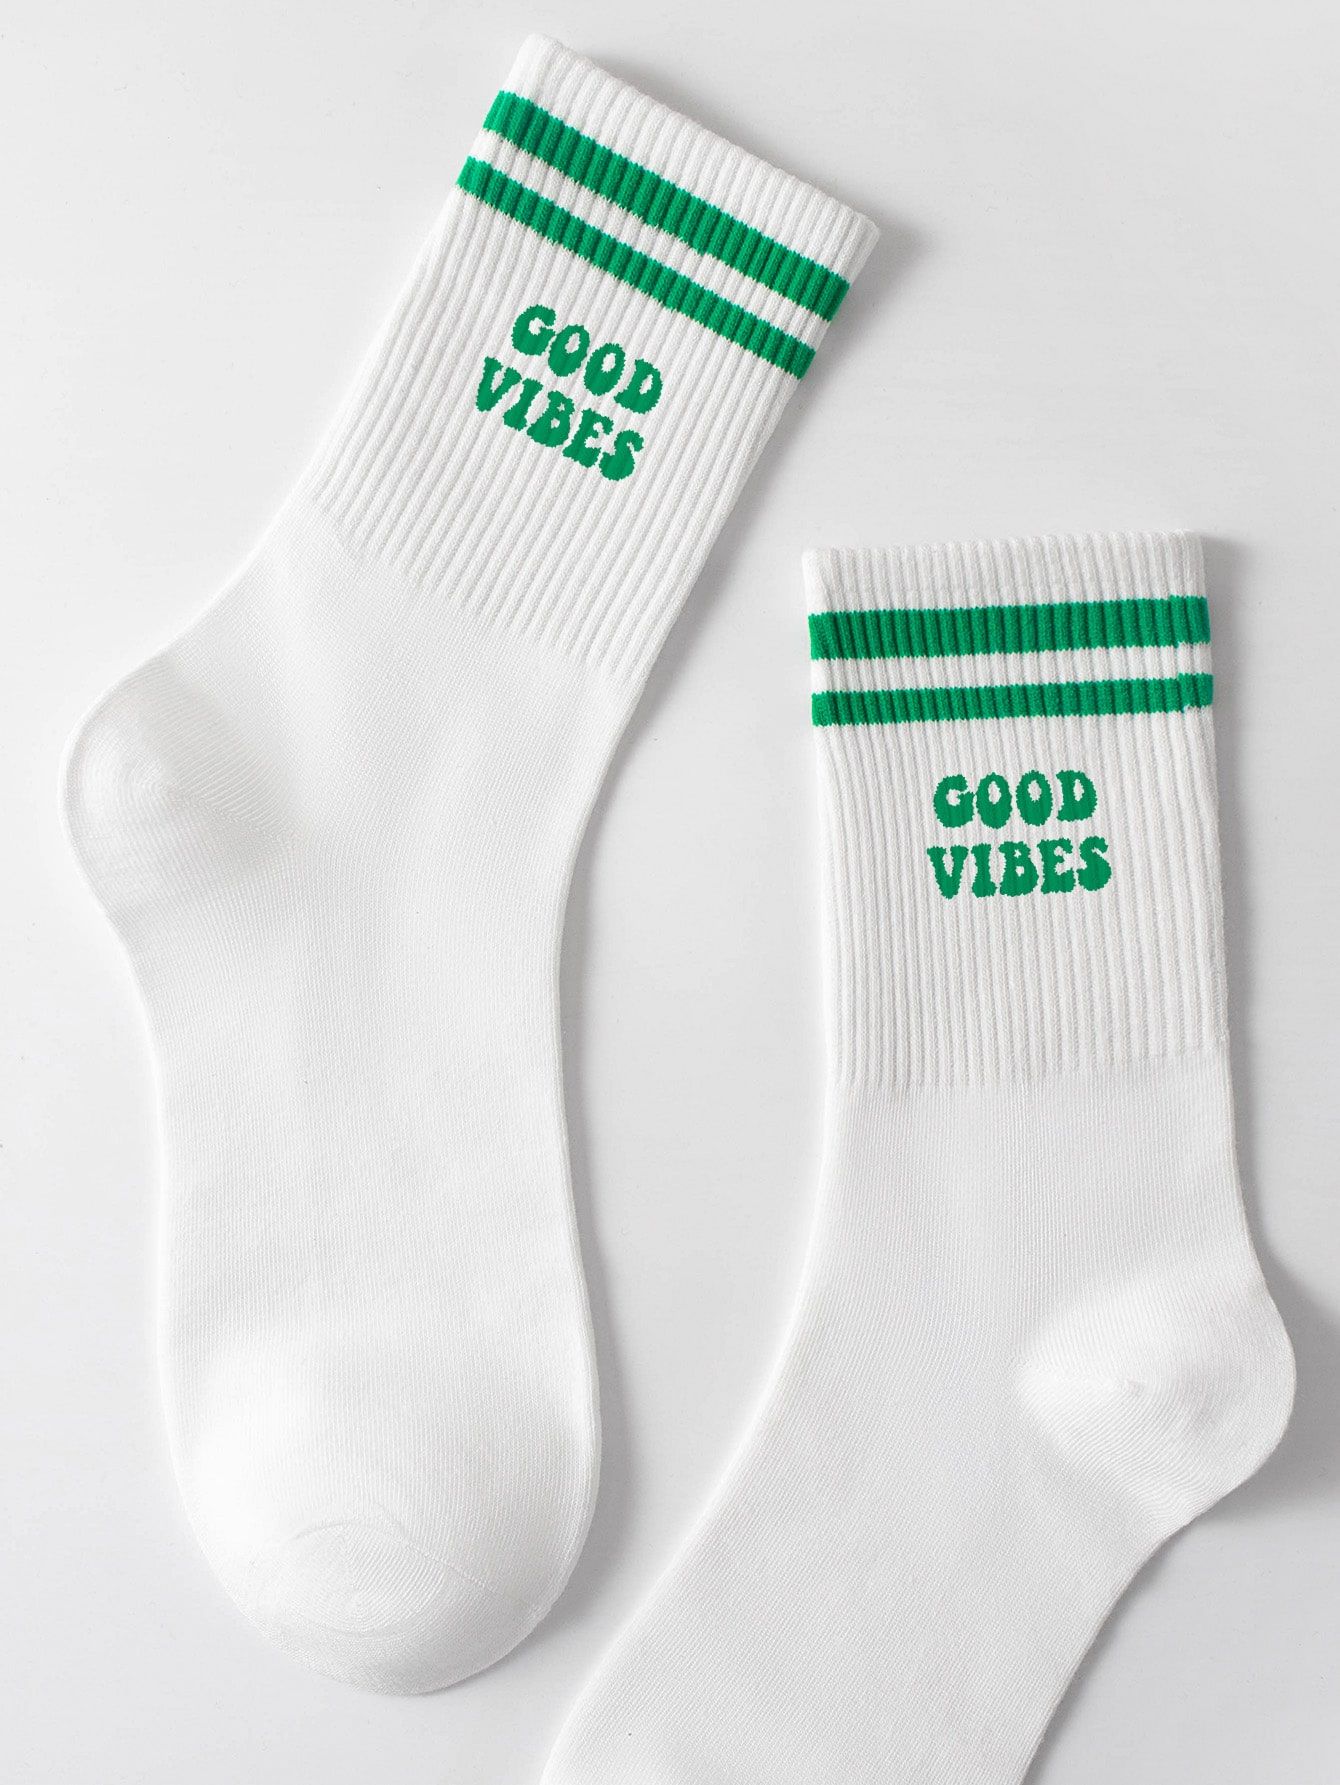 1pair Women's Mid-calf Socks With Good Vibes Lettering, Green Stripes, Antimicrobial, Moisture Wi... | SHEIN